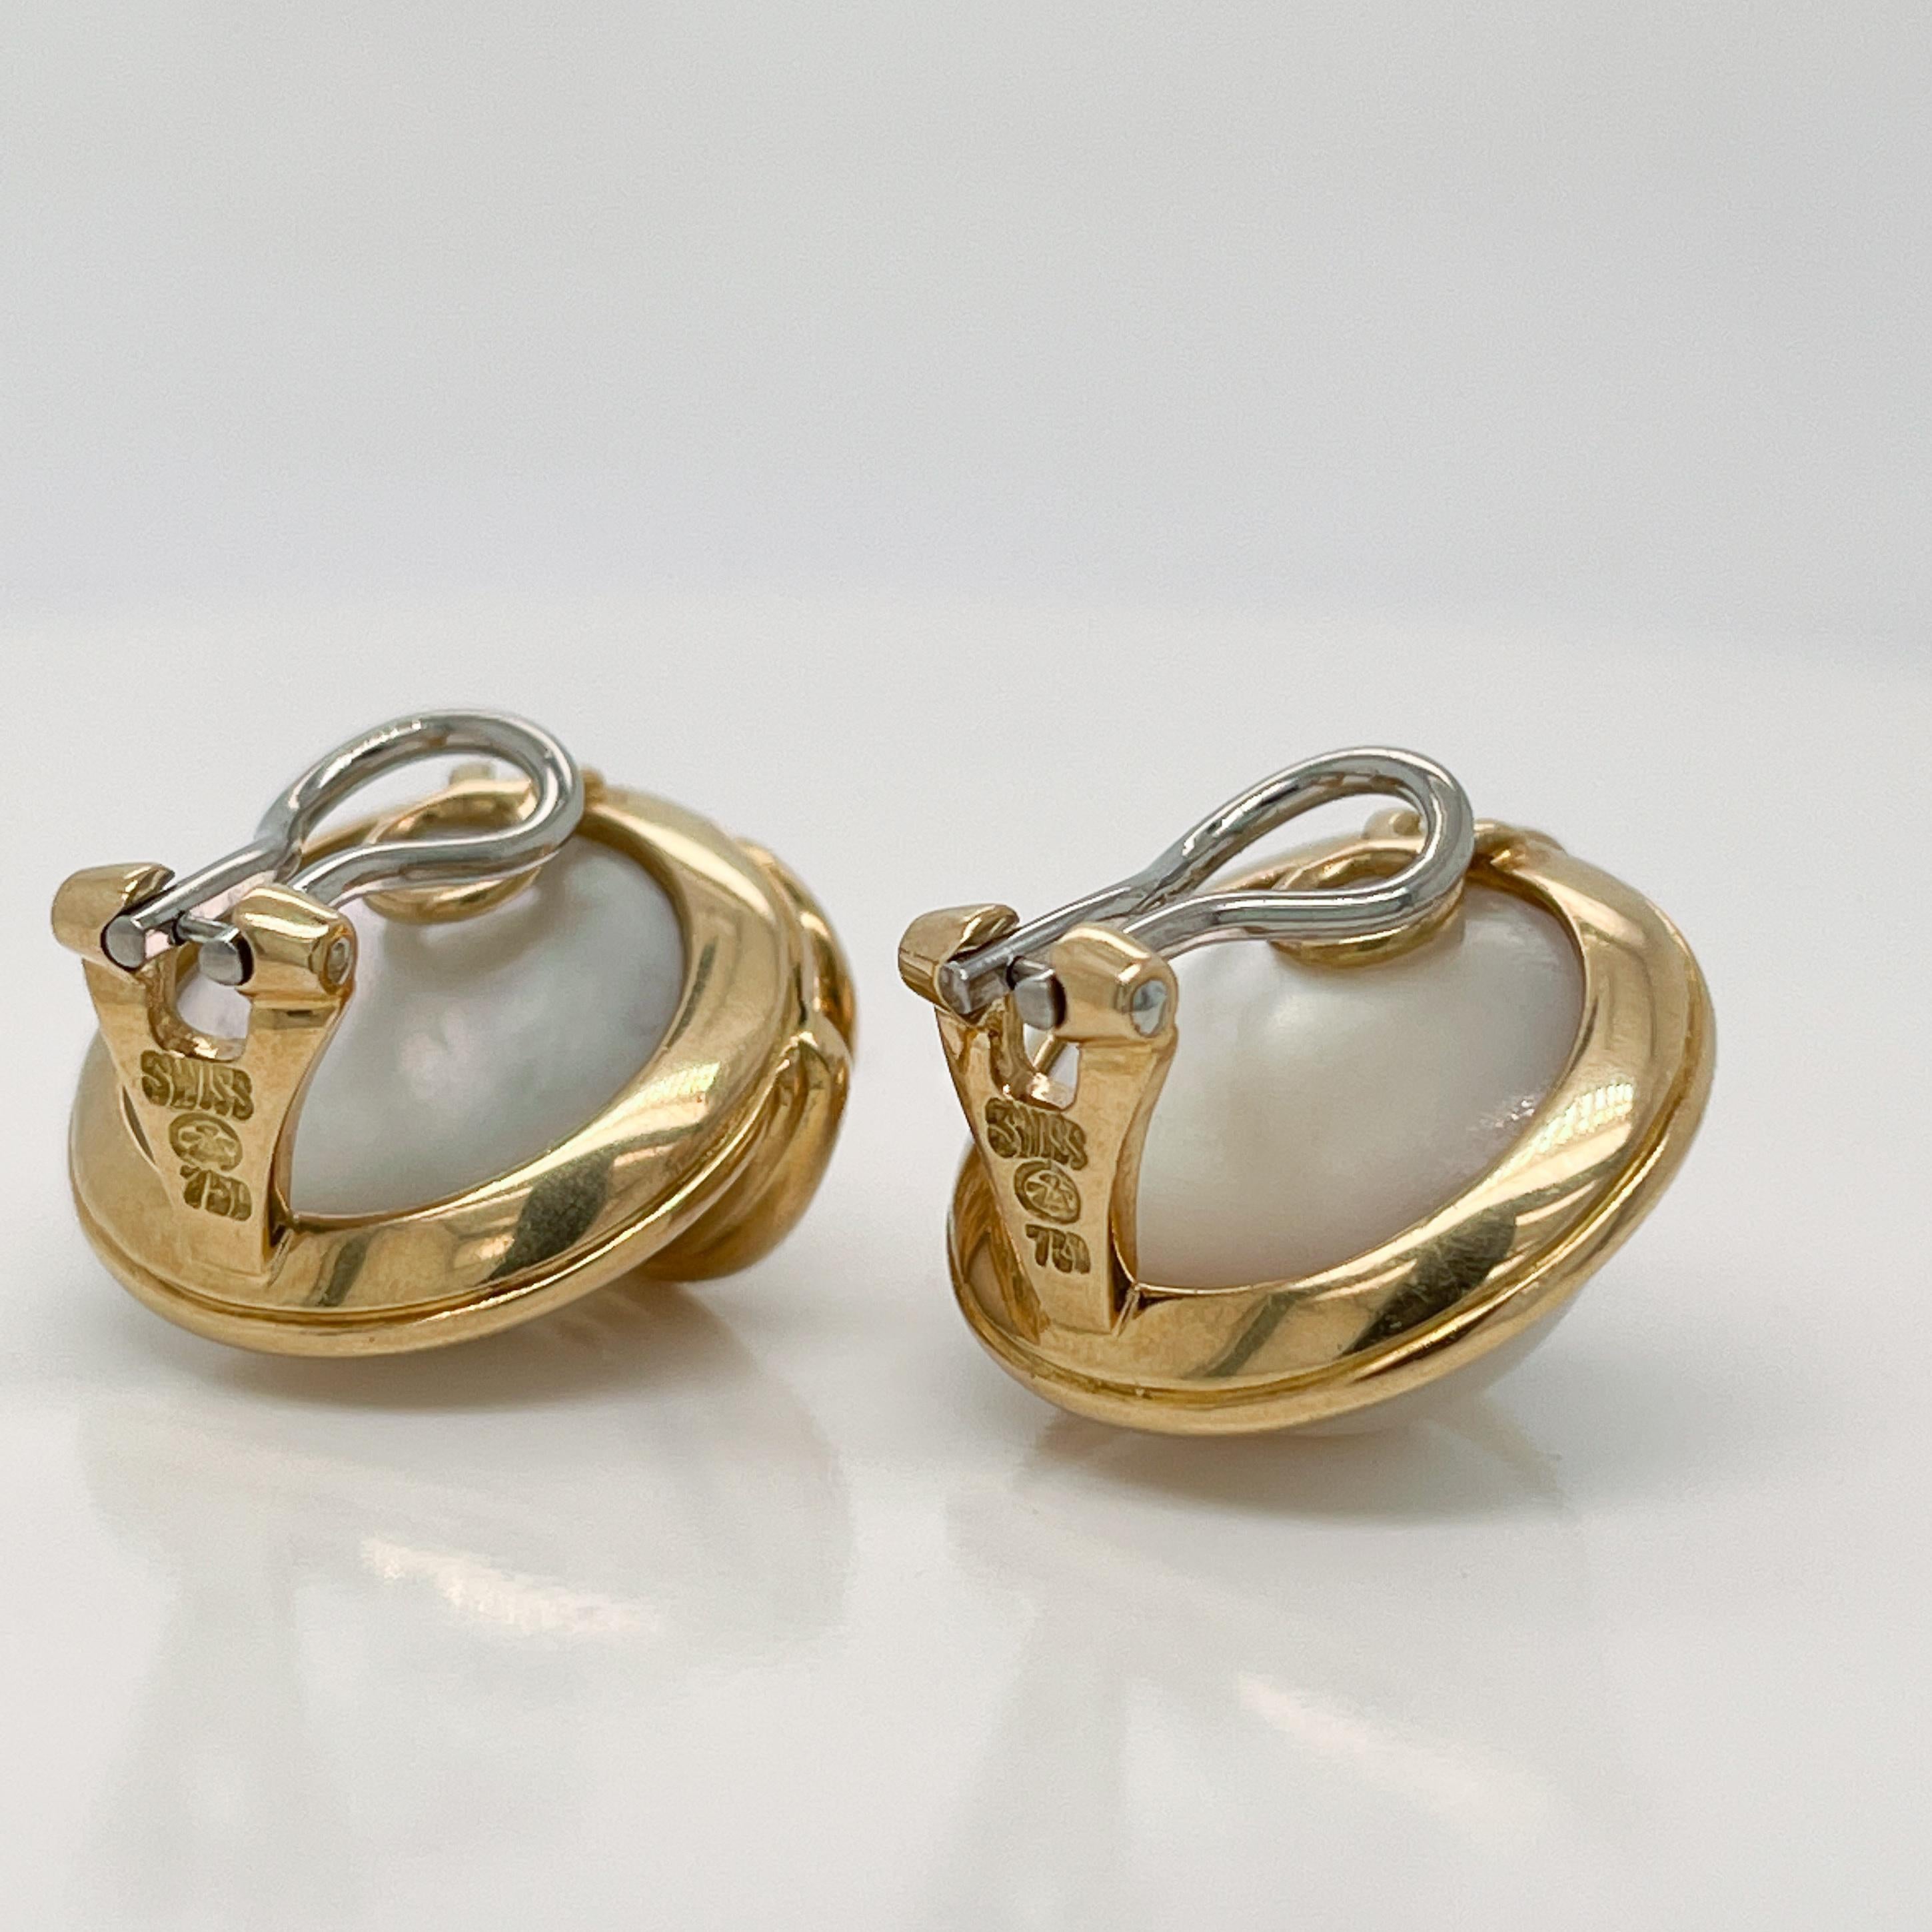 Pair of Signed Gübelin 18K Gold, Diamond & Mabe Pearl Clip-On Earrings For Sale 3